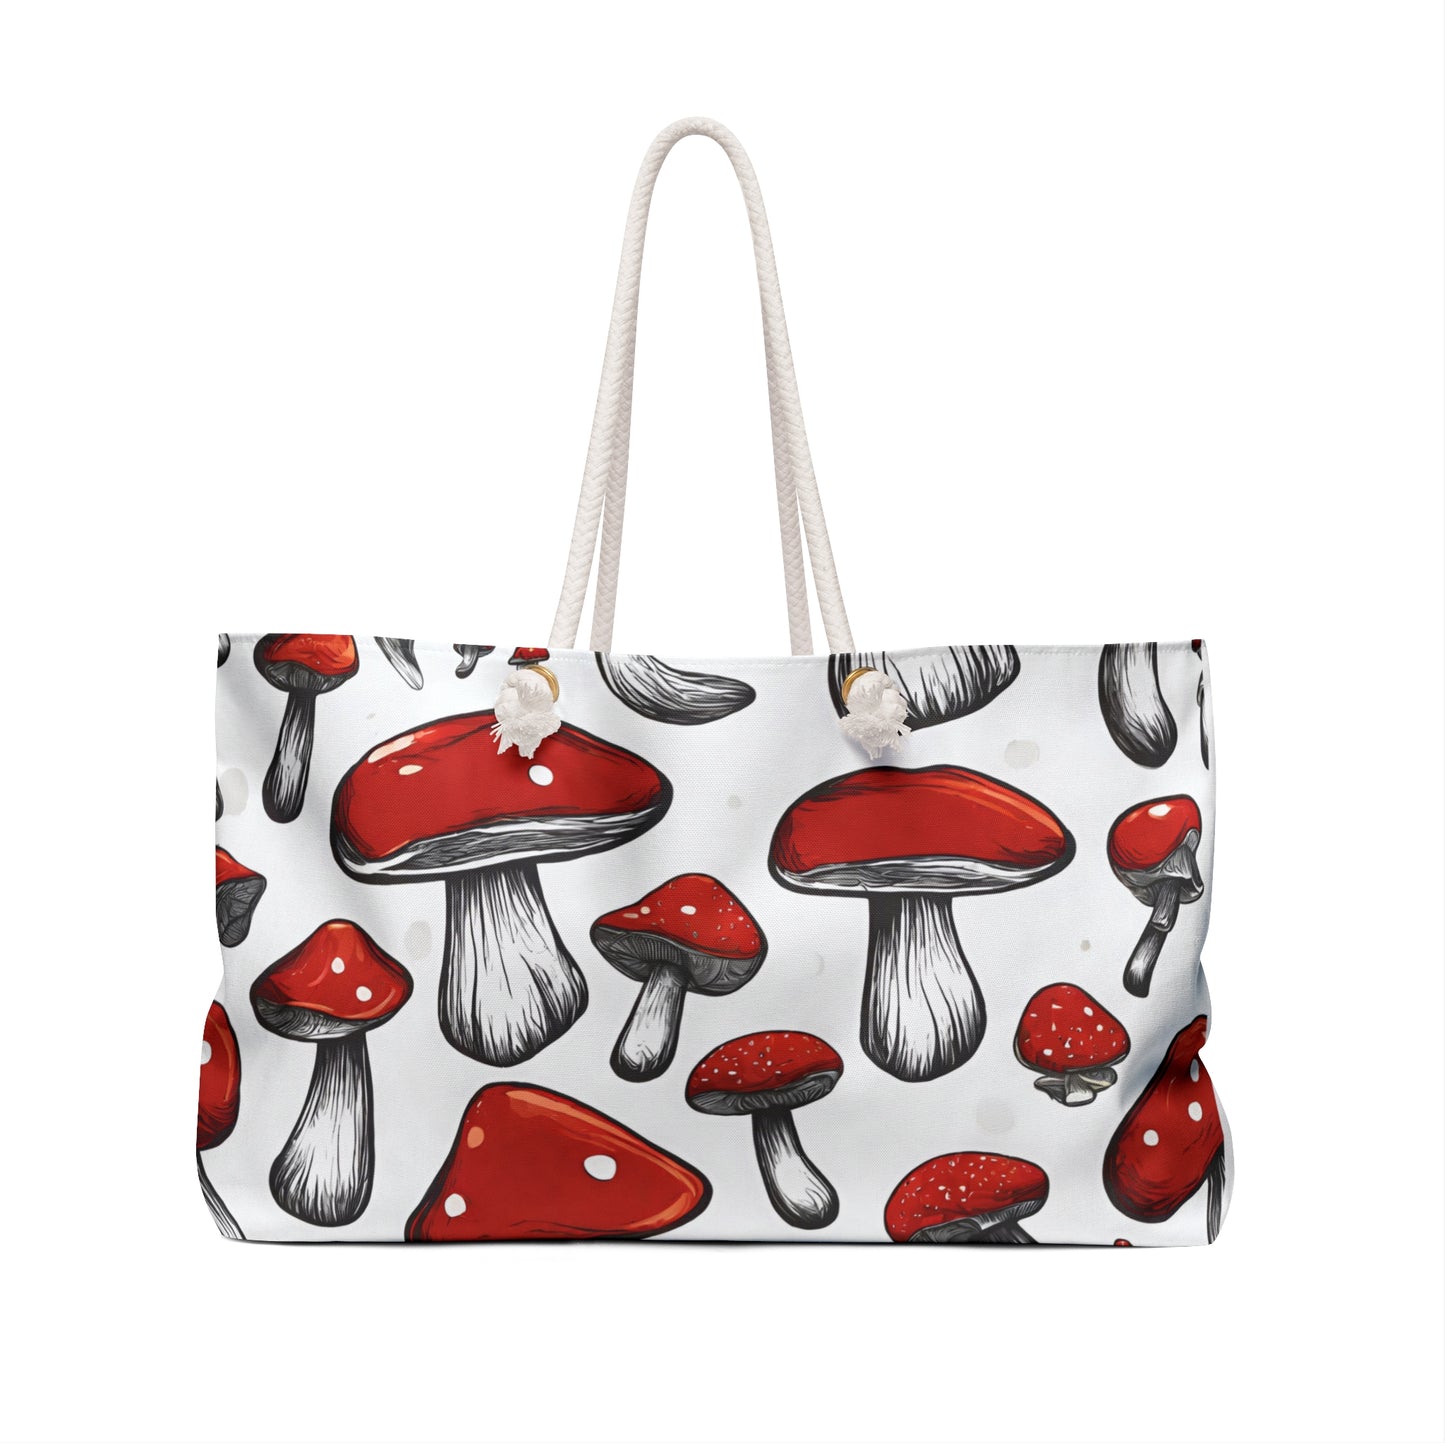 Mushrooms Weekender beach travel tote Bag, tote bag for books, weekend large crafter tote, cute hippy tote for women, gift for her friend